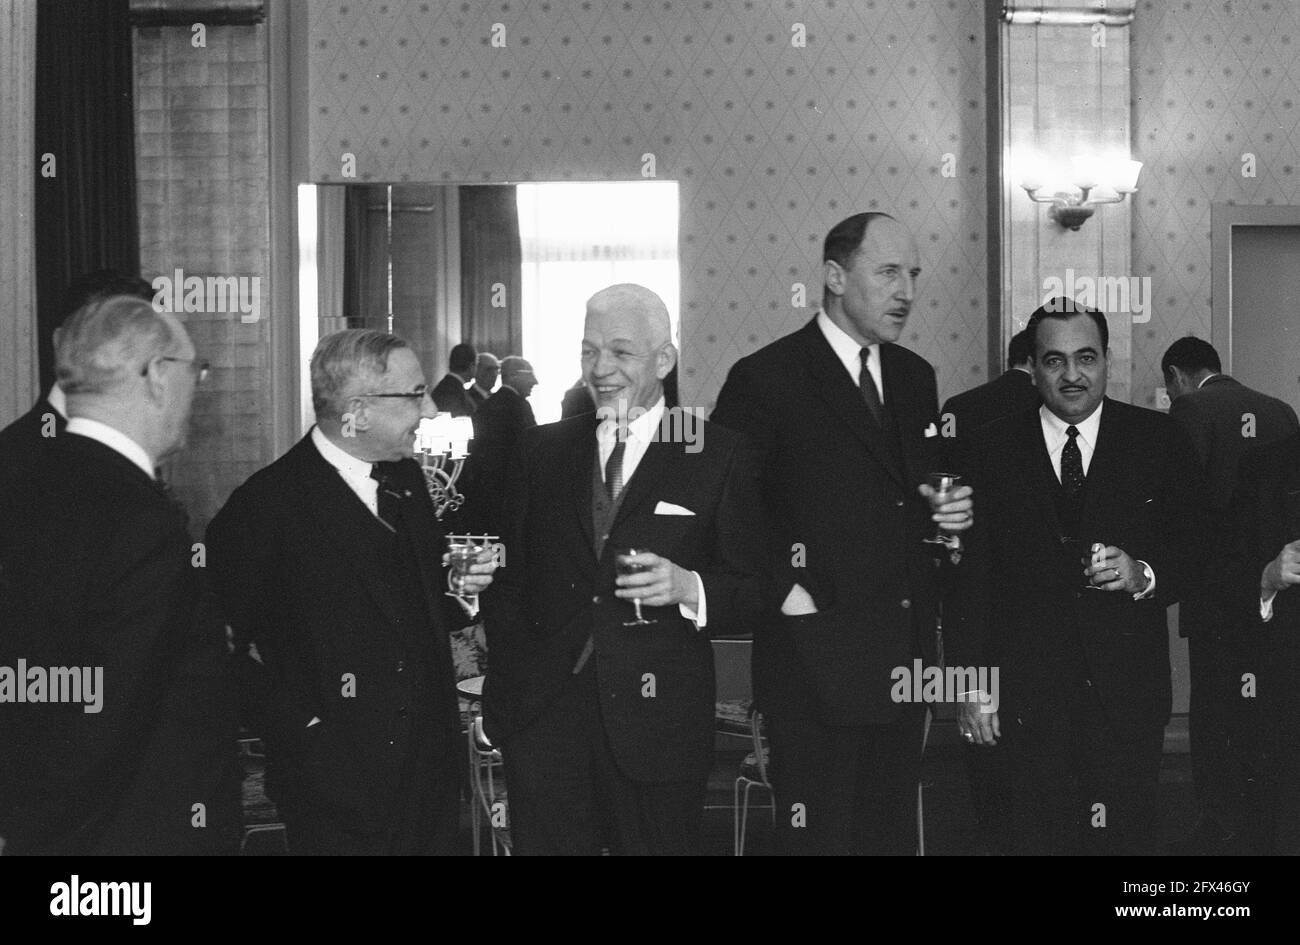 The Government offered lunch to the President of Dominican Republic at Hotel de Witte Brug in The Hague . From left to right Z. E. Diego Bordas, De Quay, Juan Bosch ,  February 14, 1963, lunch, presidents, The Netherlands, 20th century press agency photo, news to remember, documentary, historic photography 1945-1990, visual stories, human history of the Twentieth Century, capturing moments in time Stock Photo